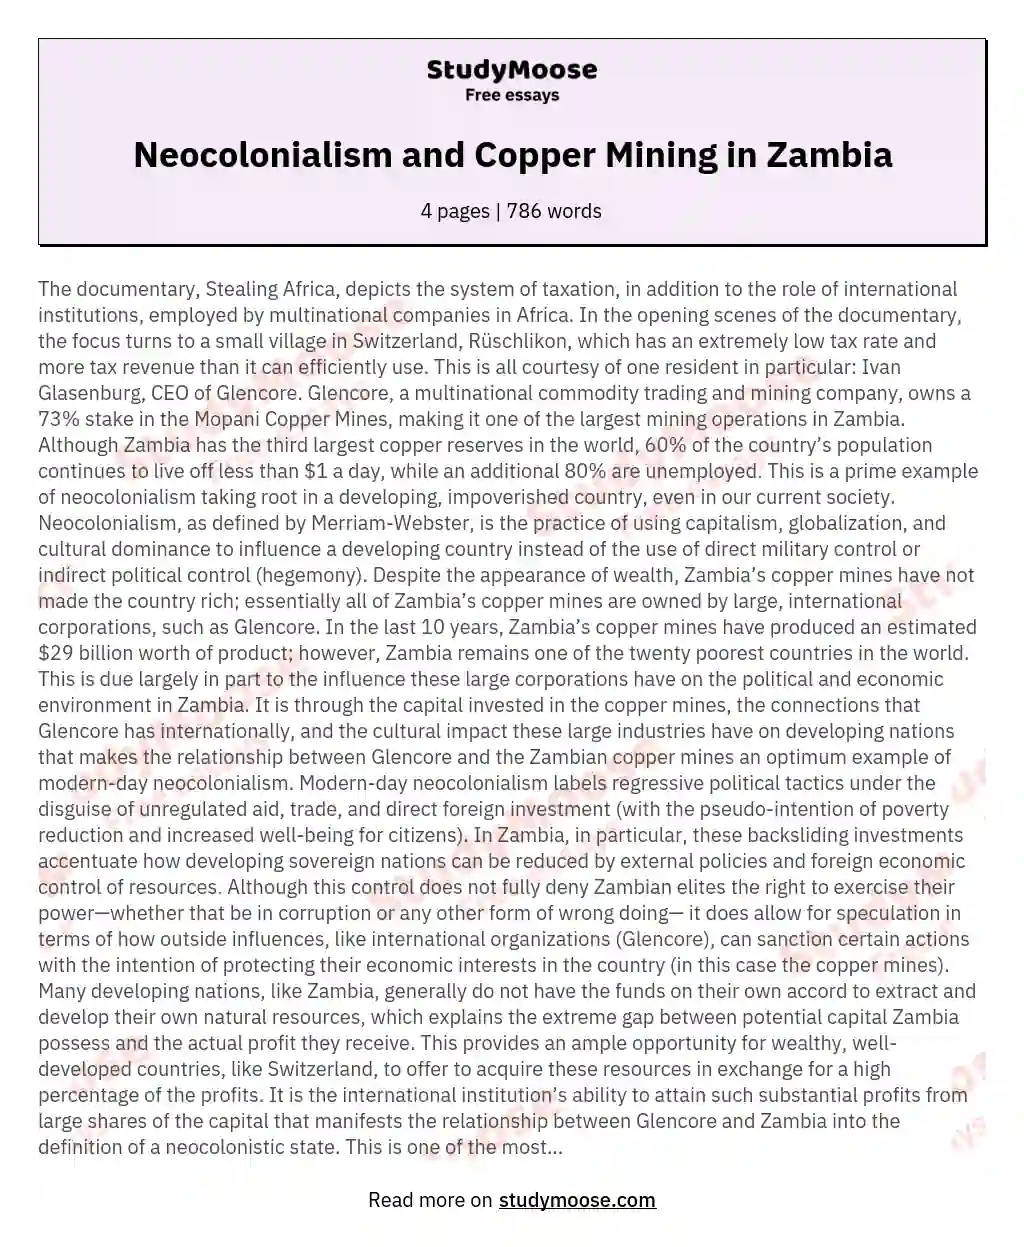 Neocolonialism and Copper Mining in Zambia essay